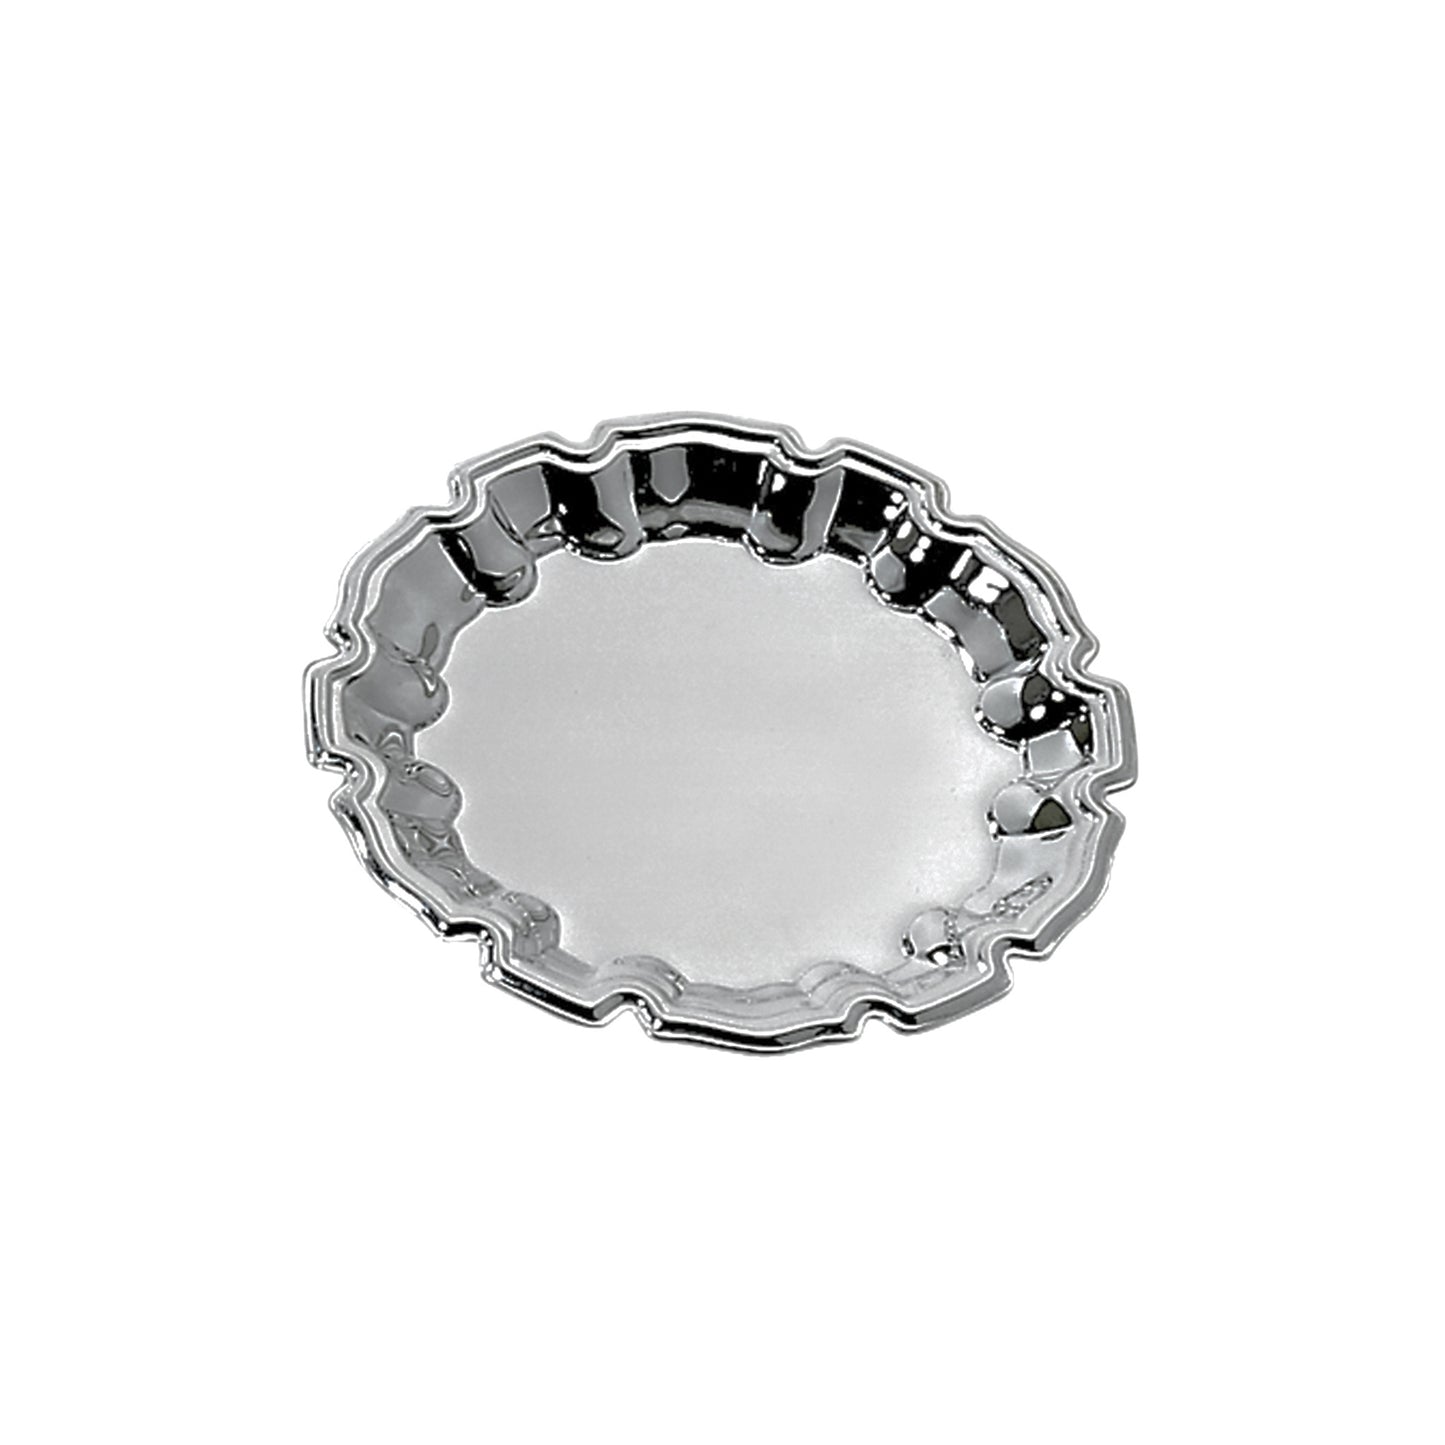 Chippendale Style Tray - 10"